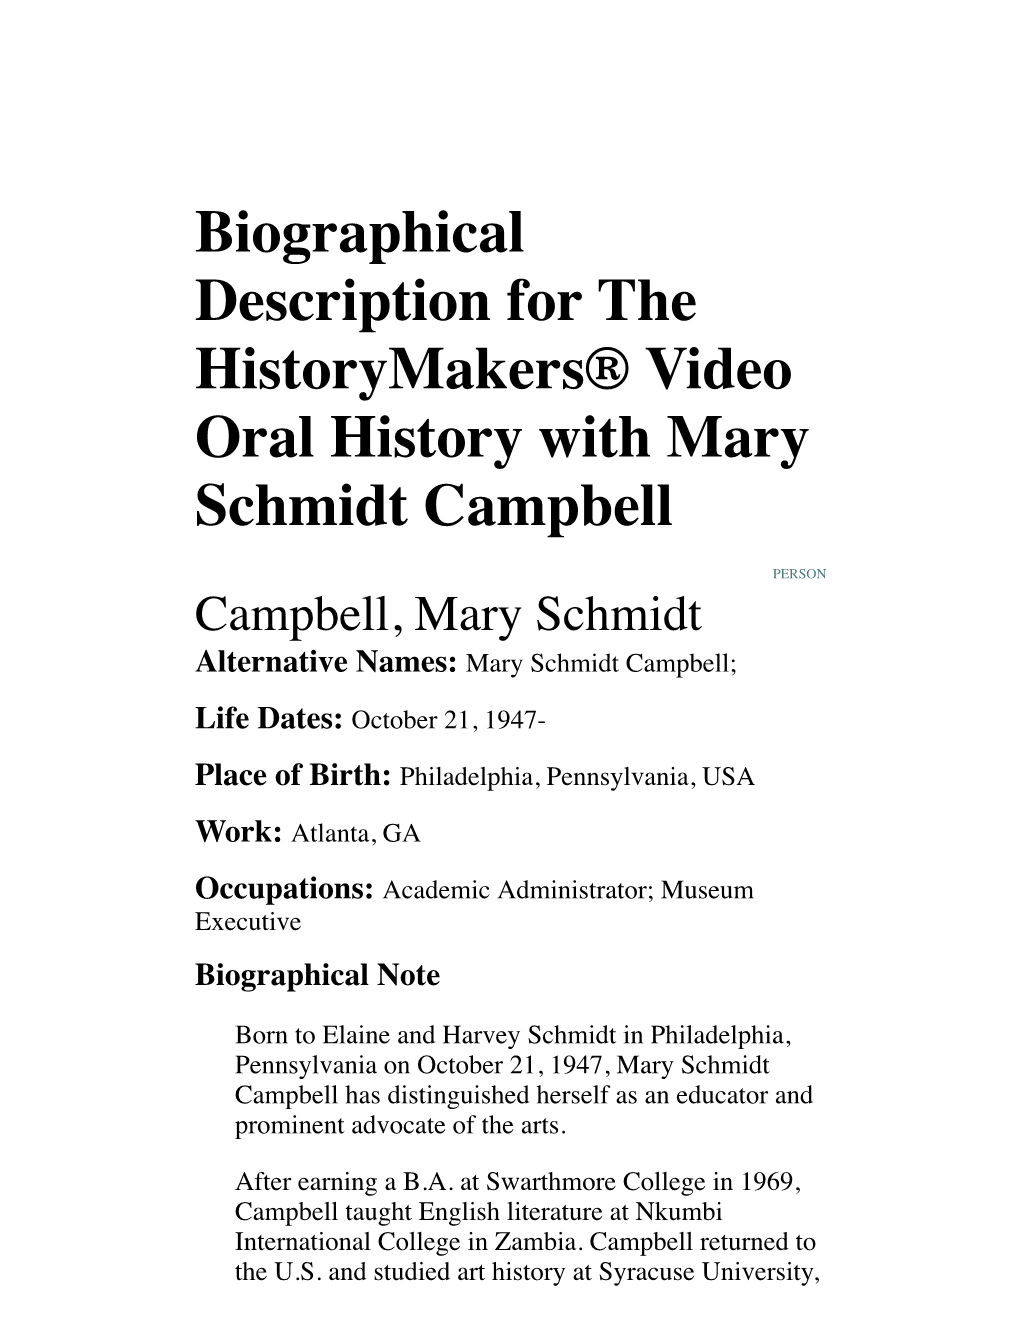 Biographical Description for the Historymakers® Video Oral History with Mary Schmidt Campbell